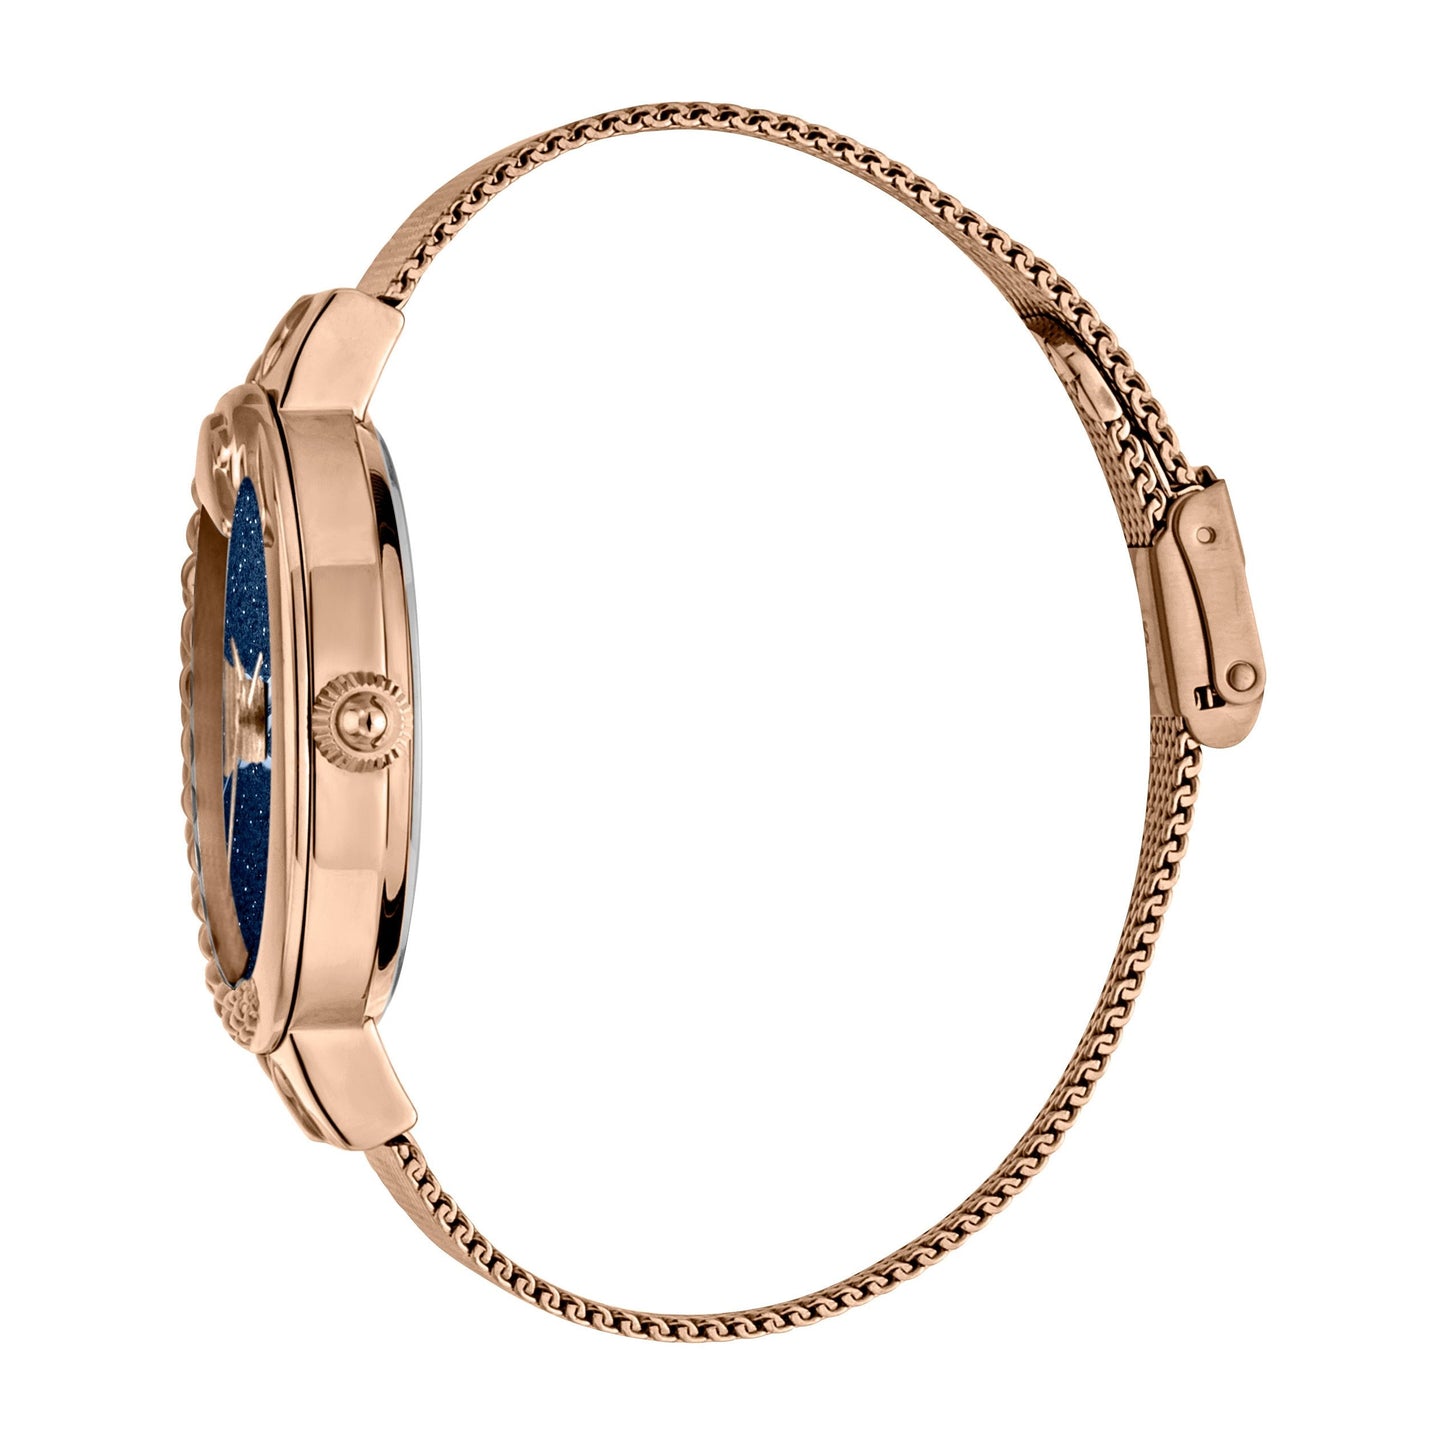 JUST CAVALLI Bling 40mm Milanese Rose Gold/Blue Watch